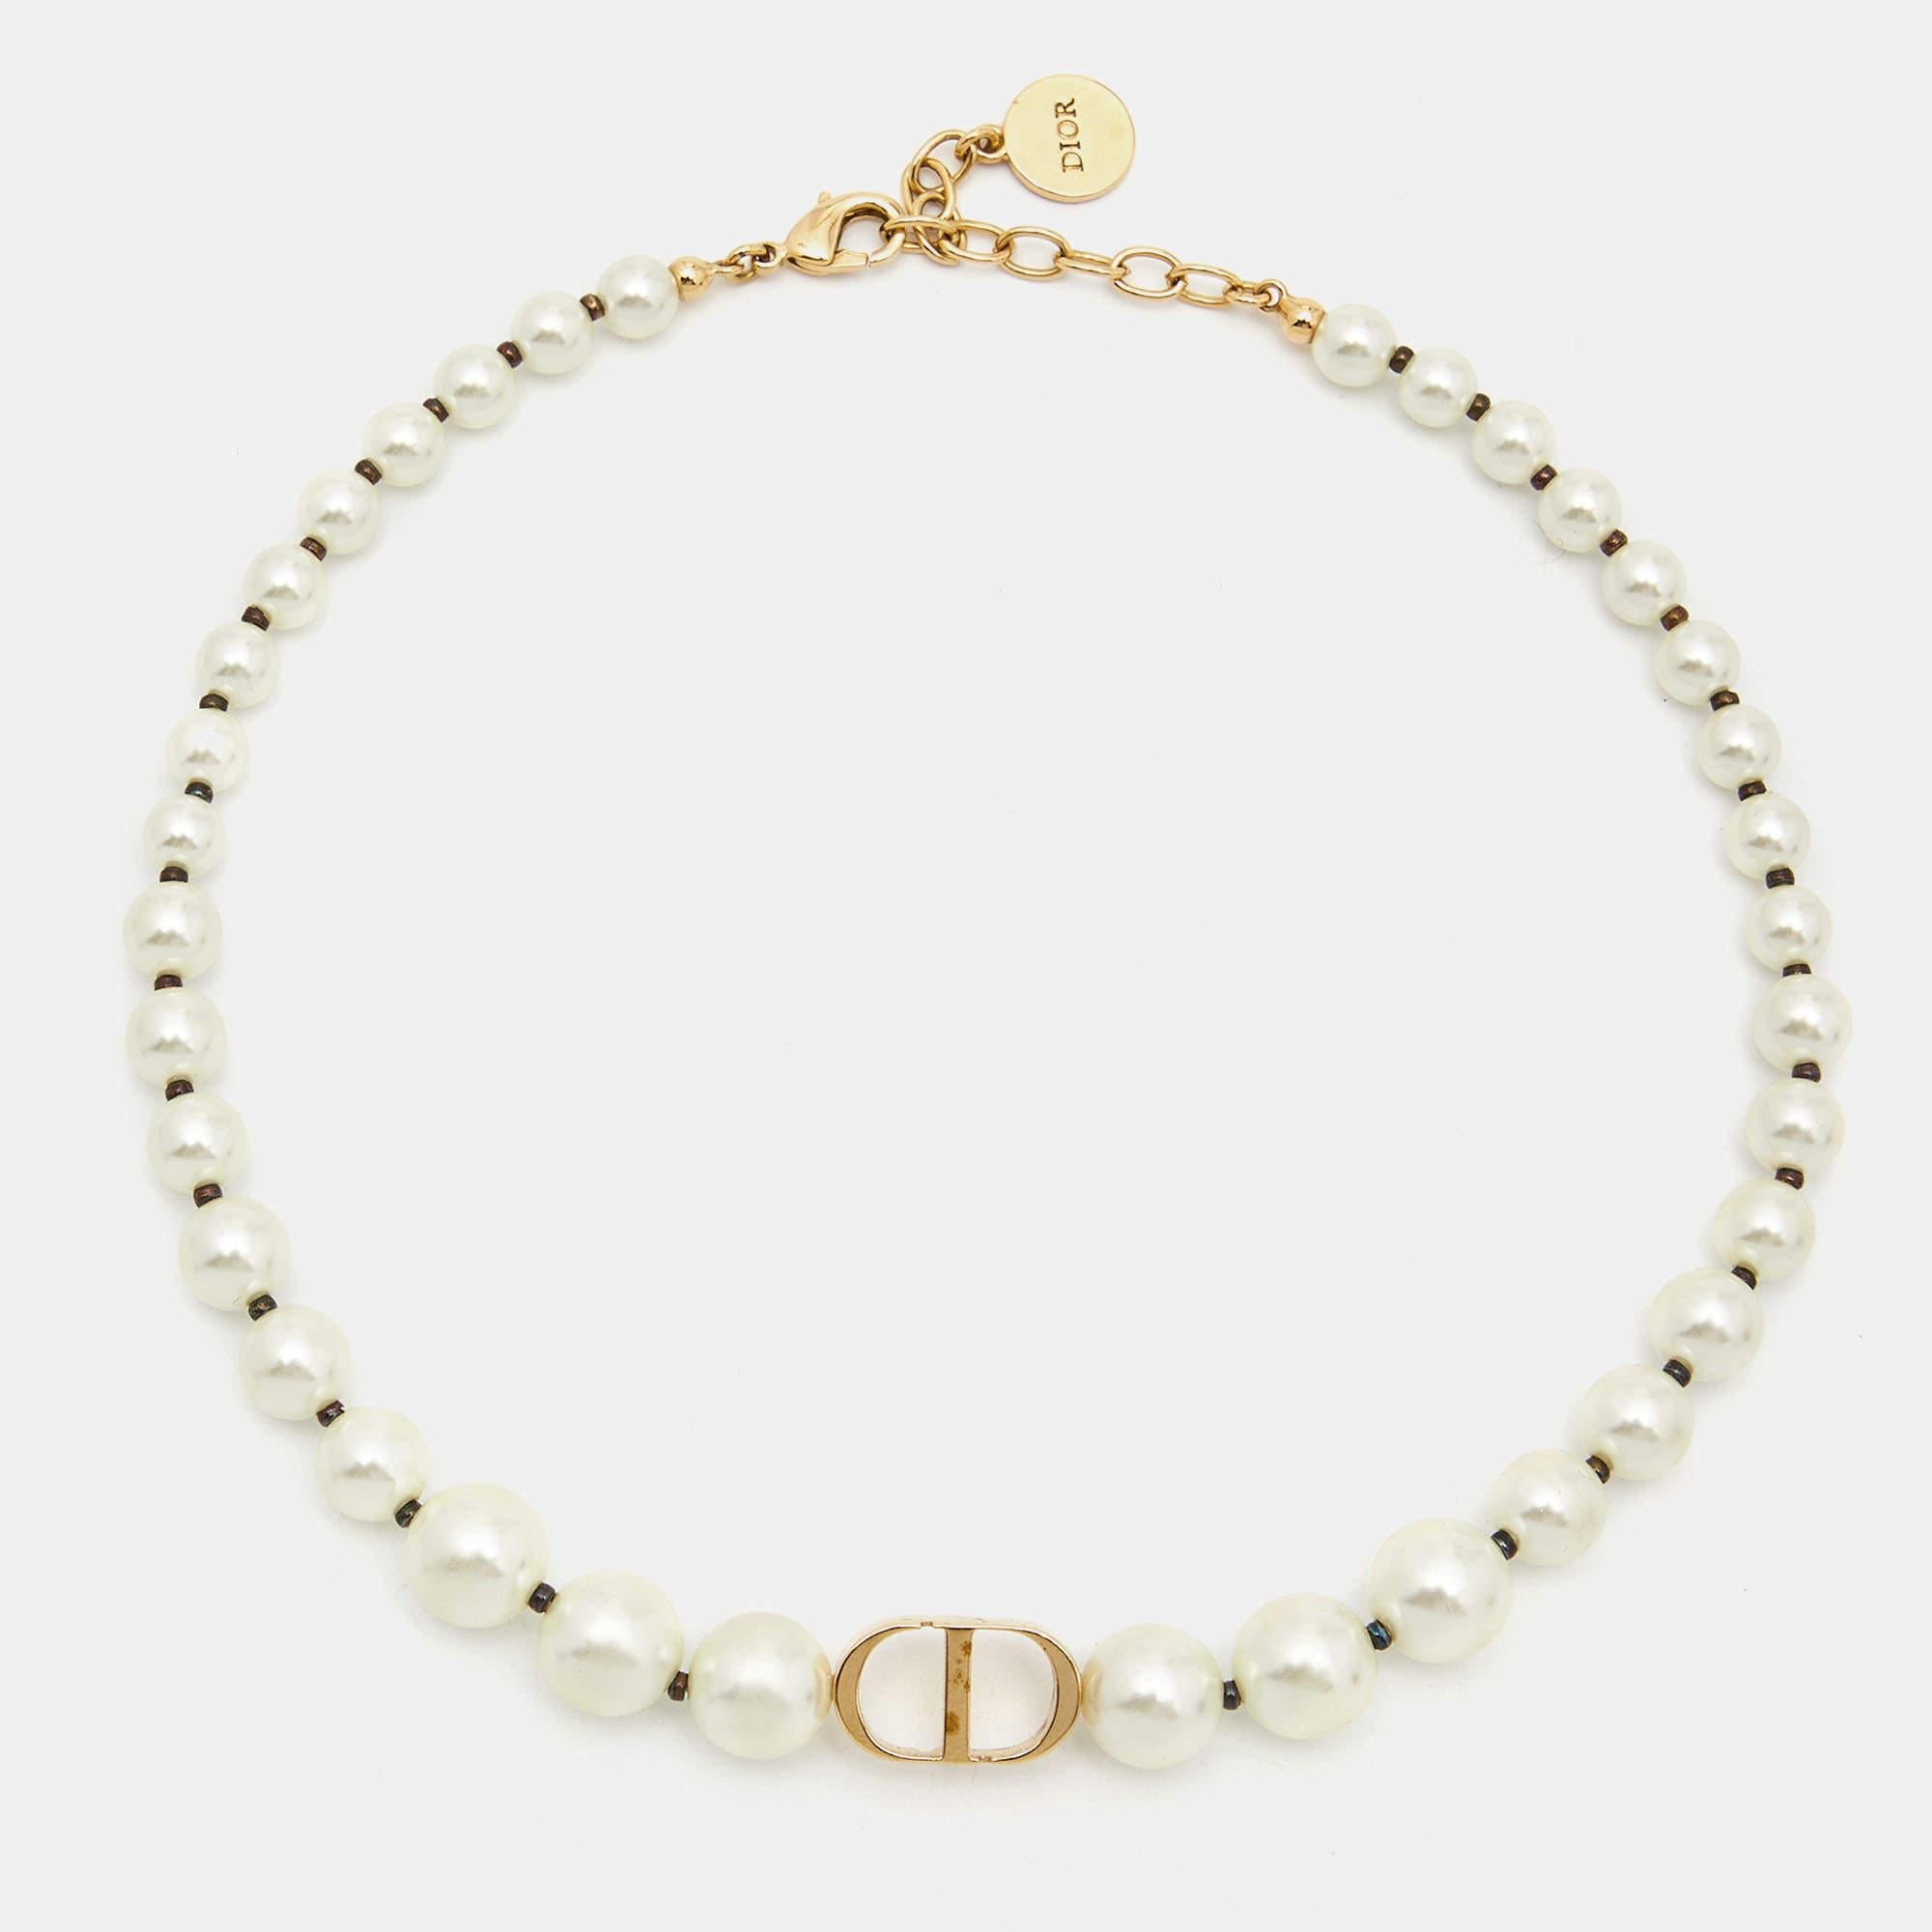 The 30 Montaigne line is a re-discovery of Dior's origins and heritage. This pearl choker is assembled with faux pearls and gold-tone and the string is finished with a CD logo and a lobster clasp.

